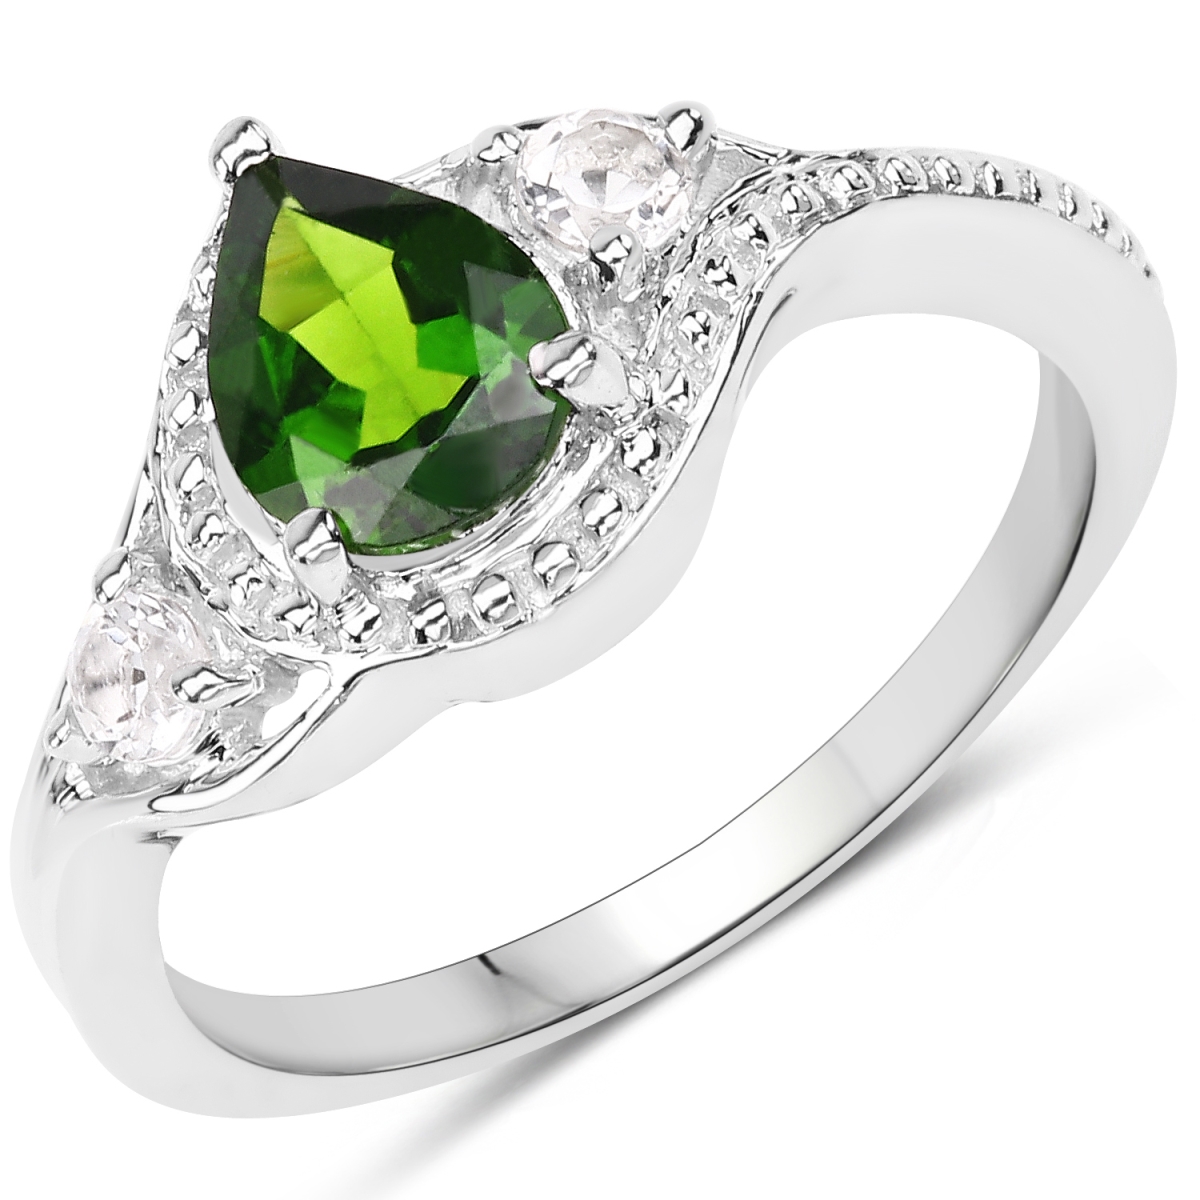 Picture of Malaika QR5881CD-SSR-6 1.30 Carat Genuine Chrome Diopside & White Topaz 0.925 Sterling Silver Ring